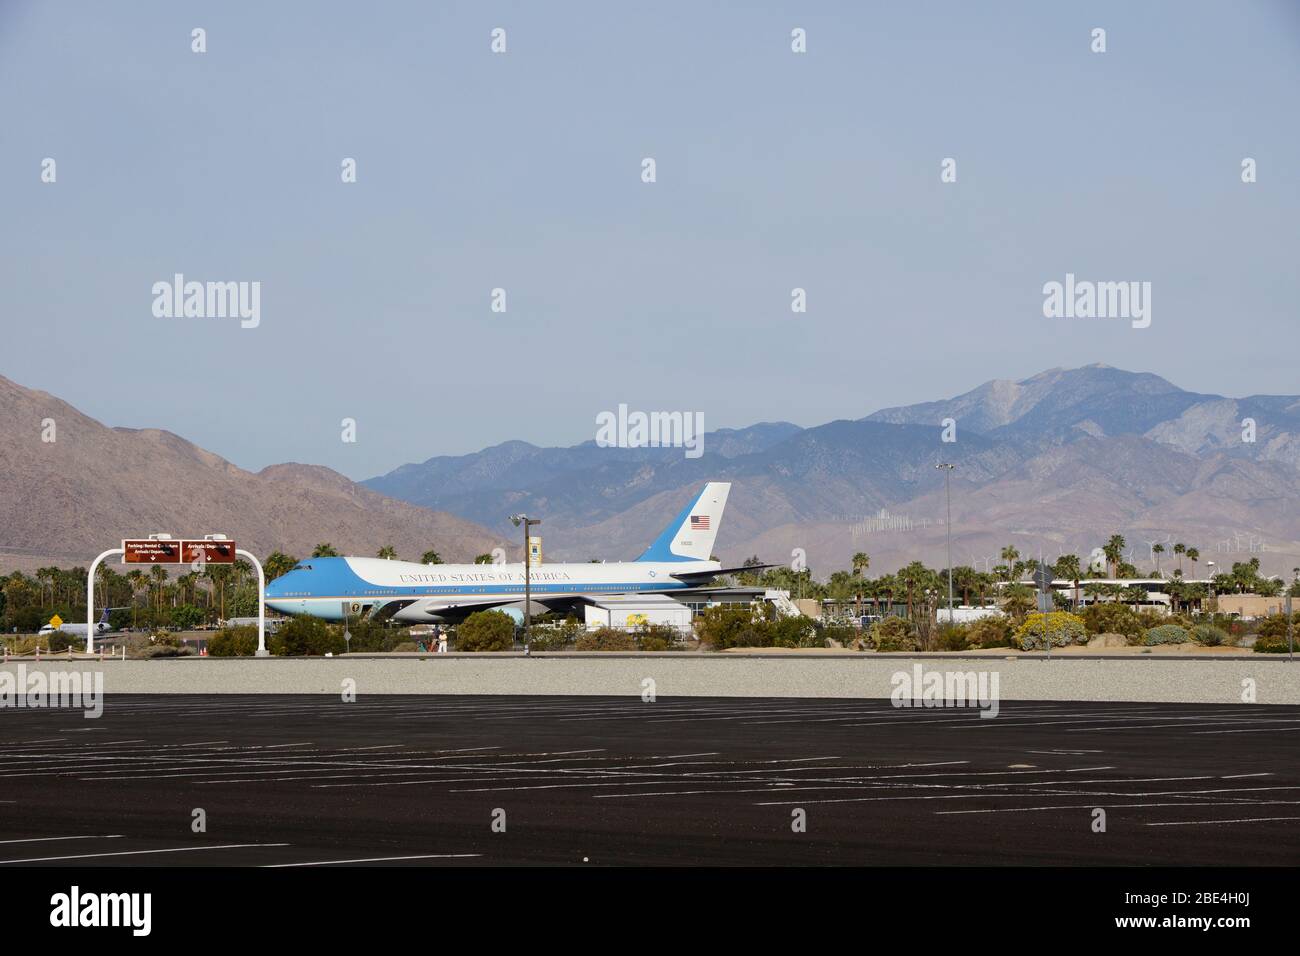 Palm Springs USA - 15 February 2014 - Airforce One airplane in Palm Springs Stock Photo